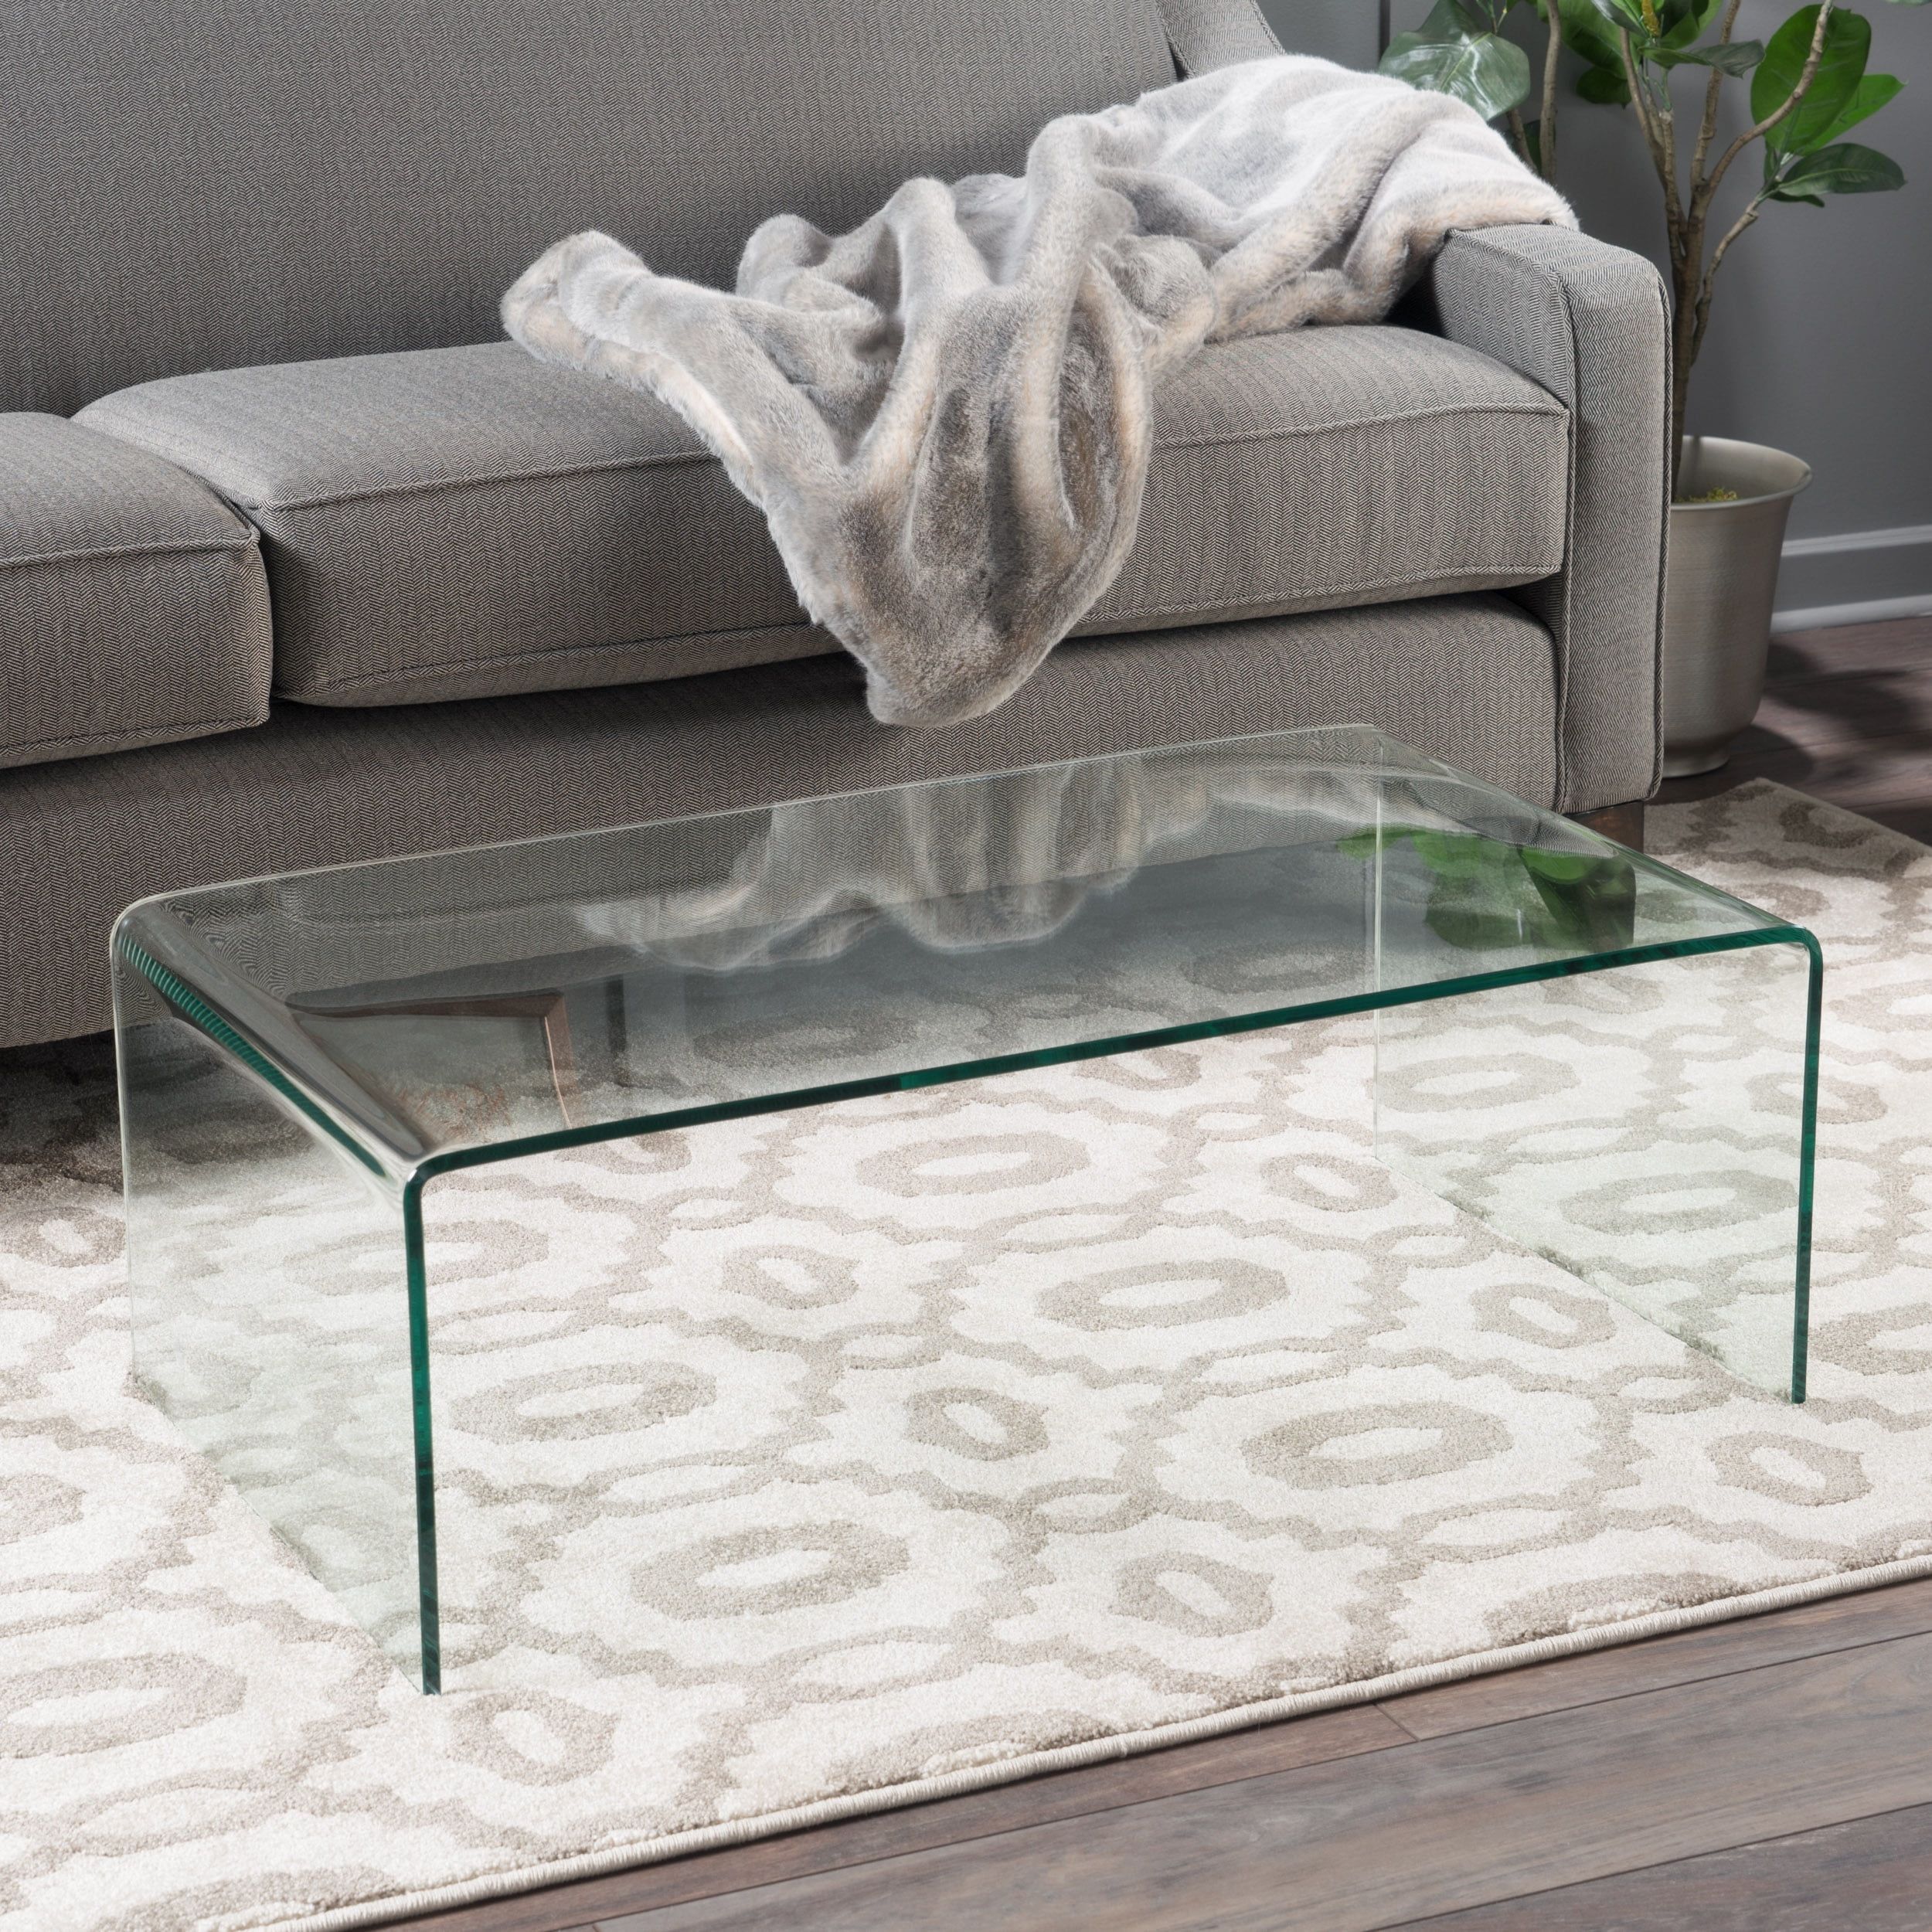 Coffee Table Tempered Glass : Reclaimed Wood & Tempered Glass Top Regarding Wood Tempered Glass Top Coffee Tables (Gallery 20 of 20)